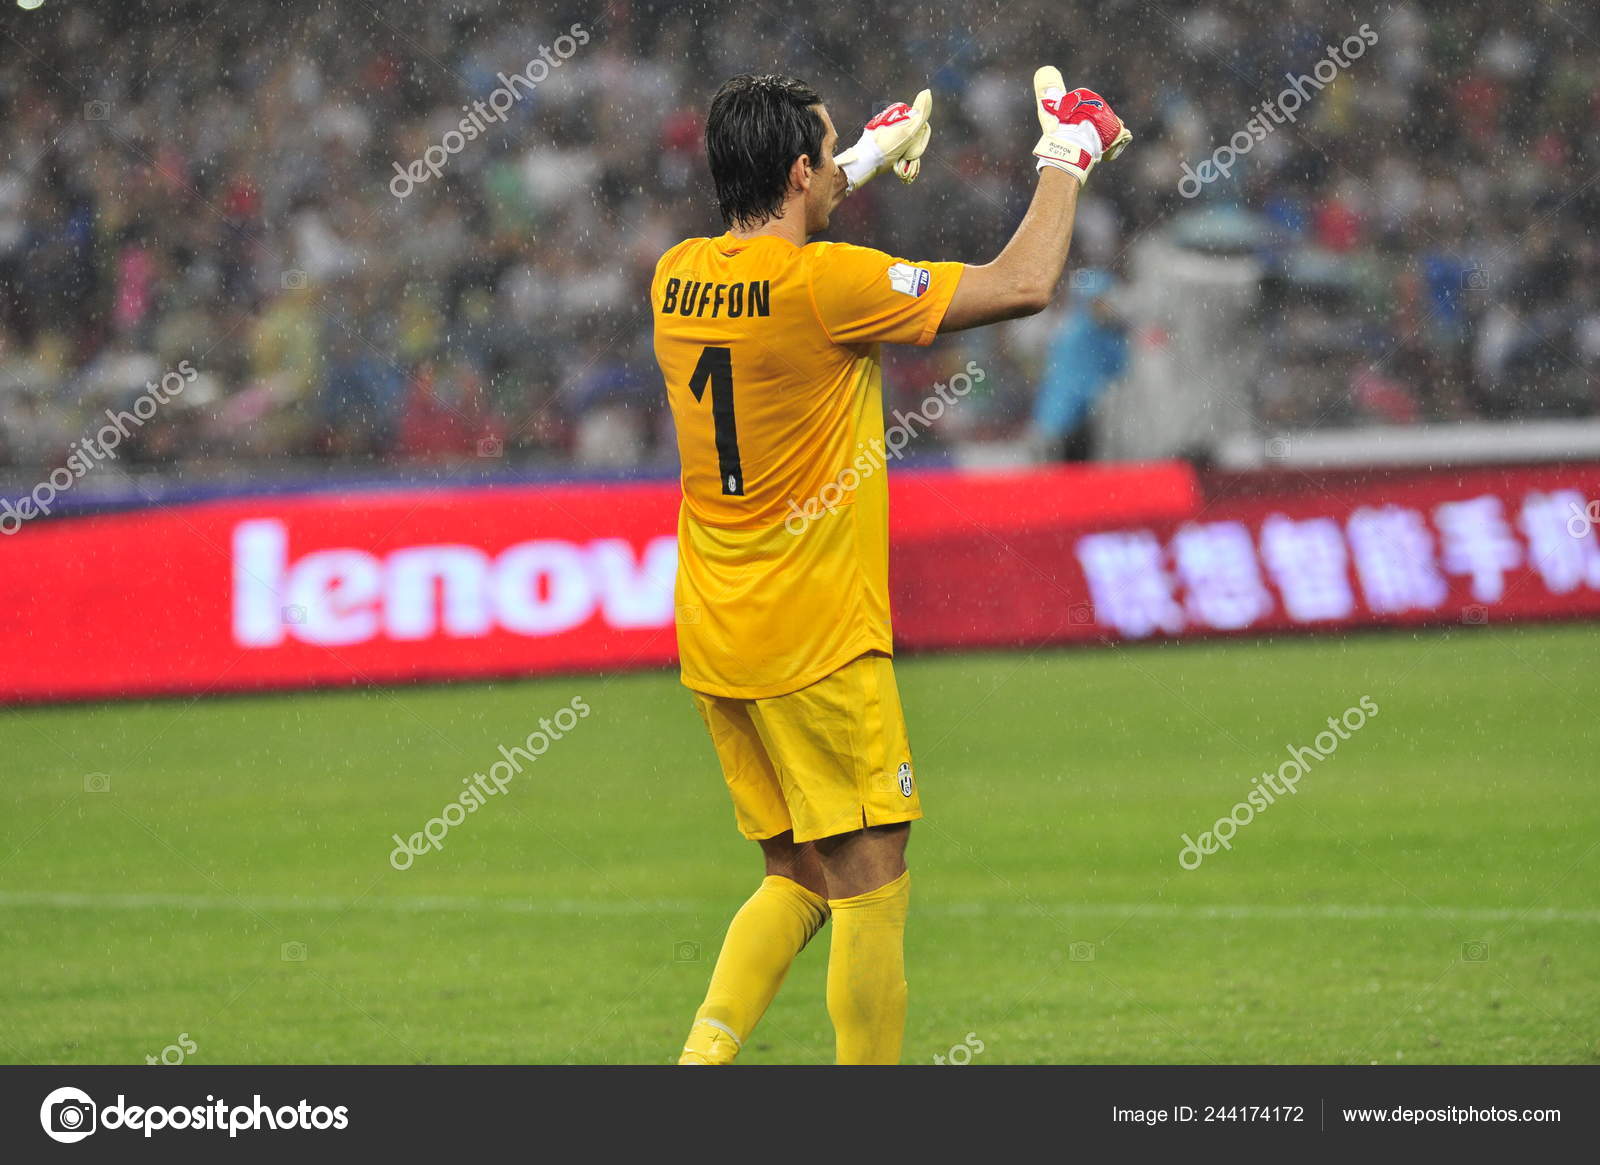 Referee danilo hi-res stock photography and images - Alamy